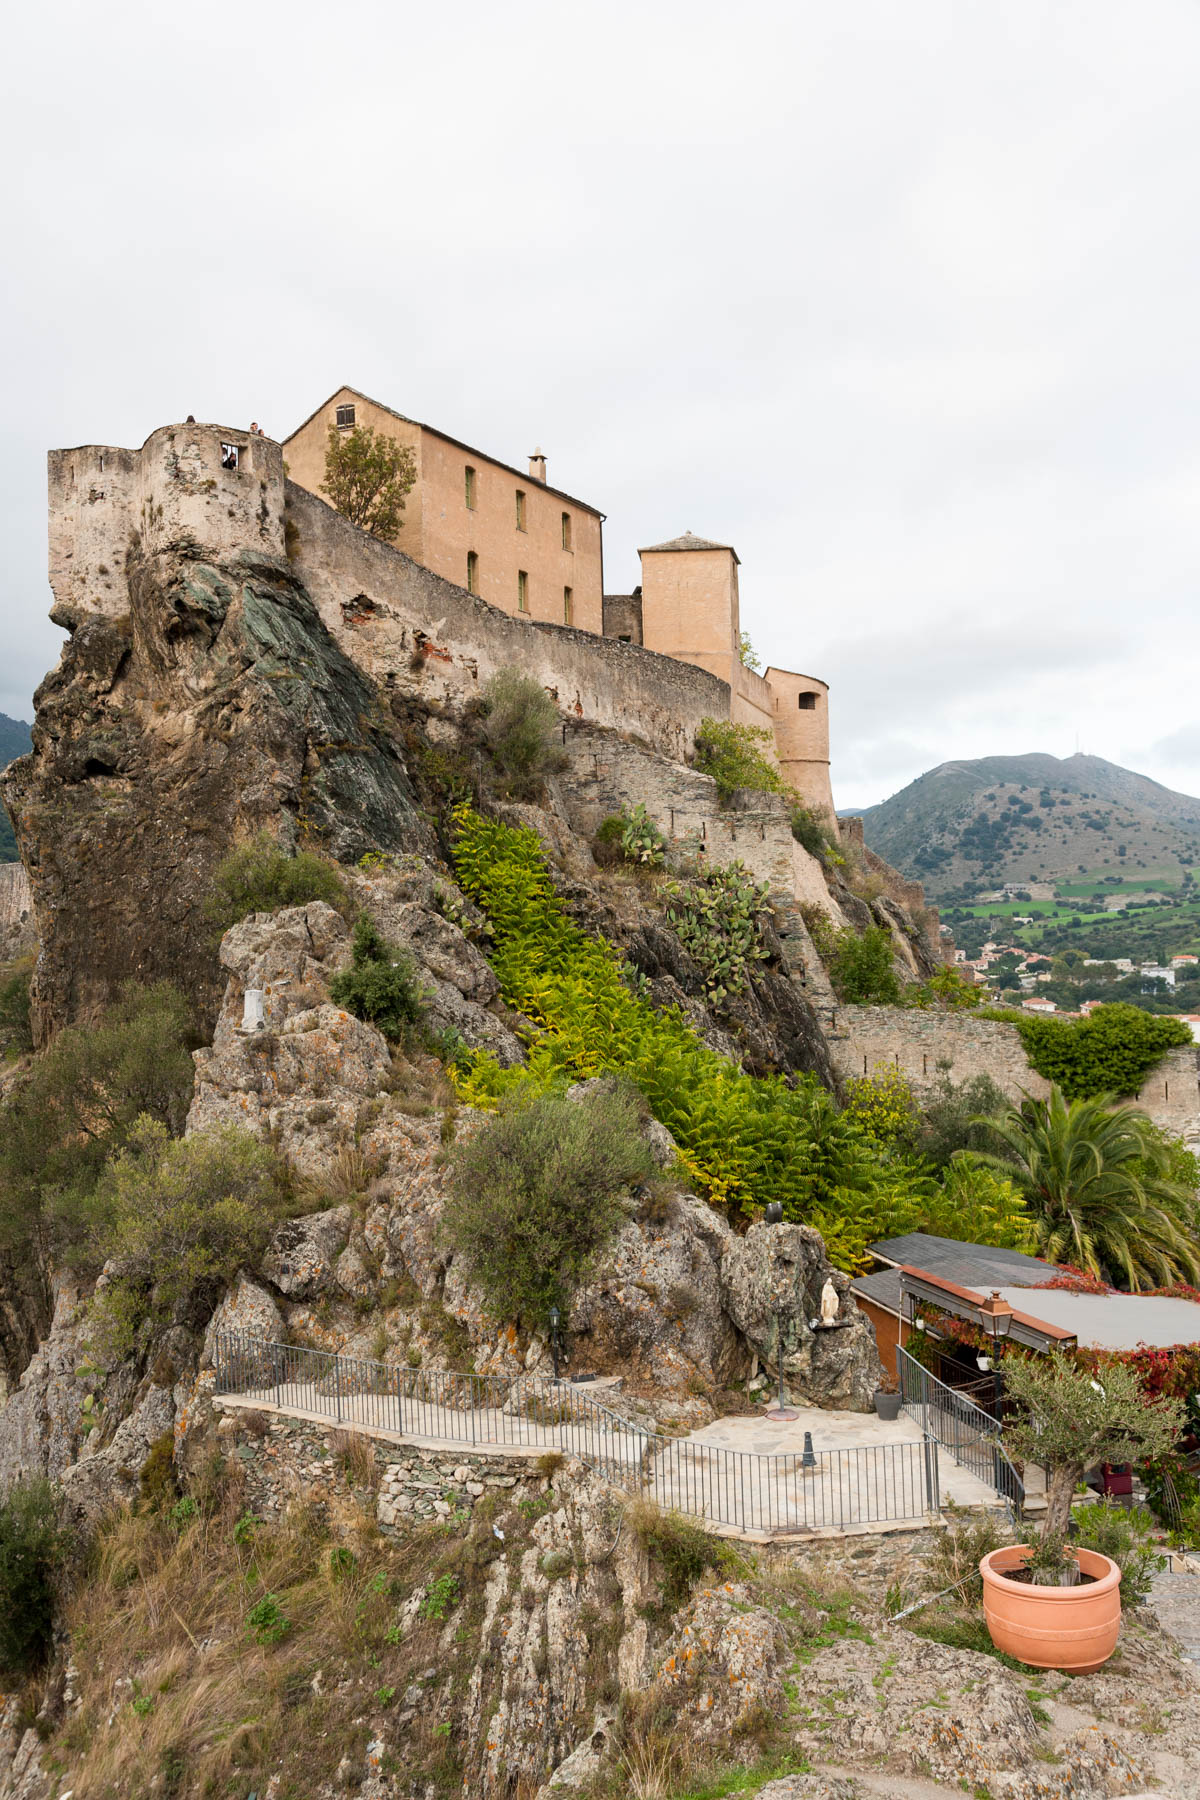 Close up shot showing the castle of Corte perched on a rocky cliff.